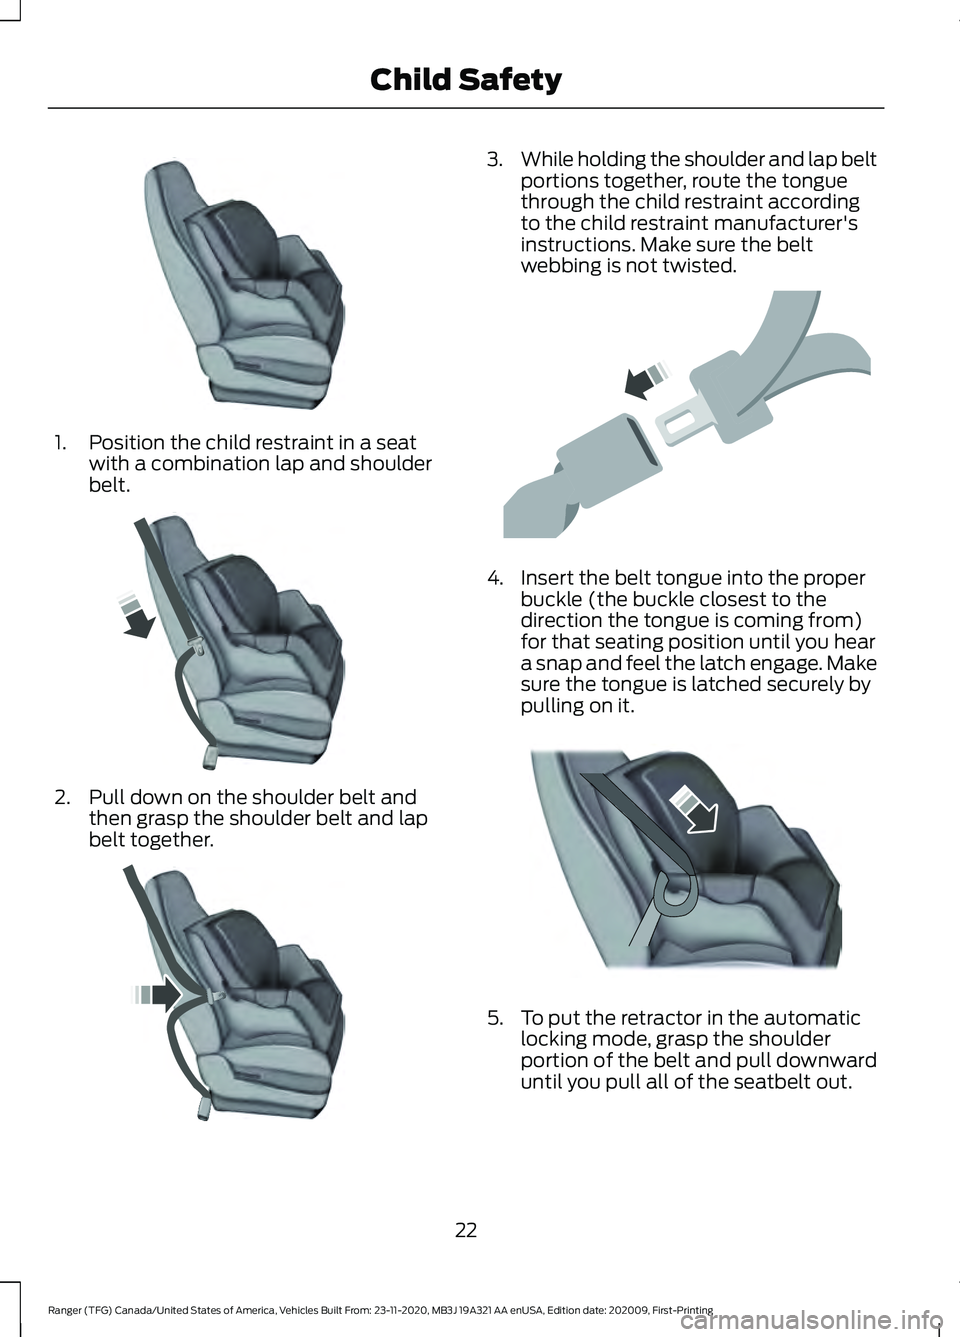 FORD RANGER 2021  Owners Manual 1. Position the child restraint in a seat
with a combination lap and shoulder
belt. 2. Pull down on the shoulder belt and
then grasp the shoulder belt and lap
belt together. 3.
While holding the shoul